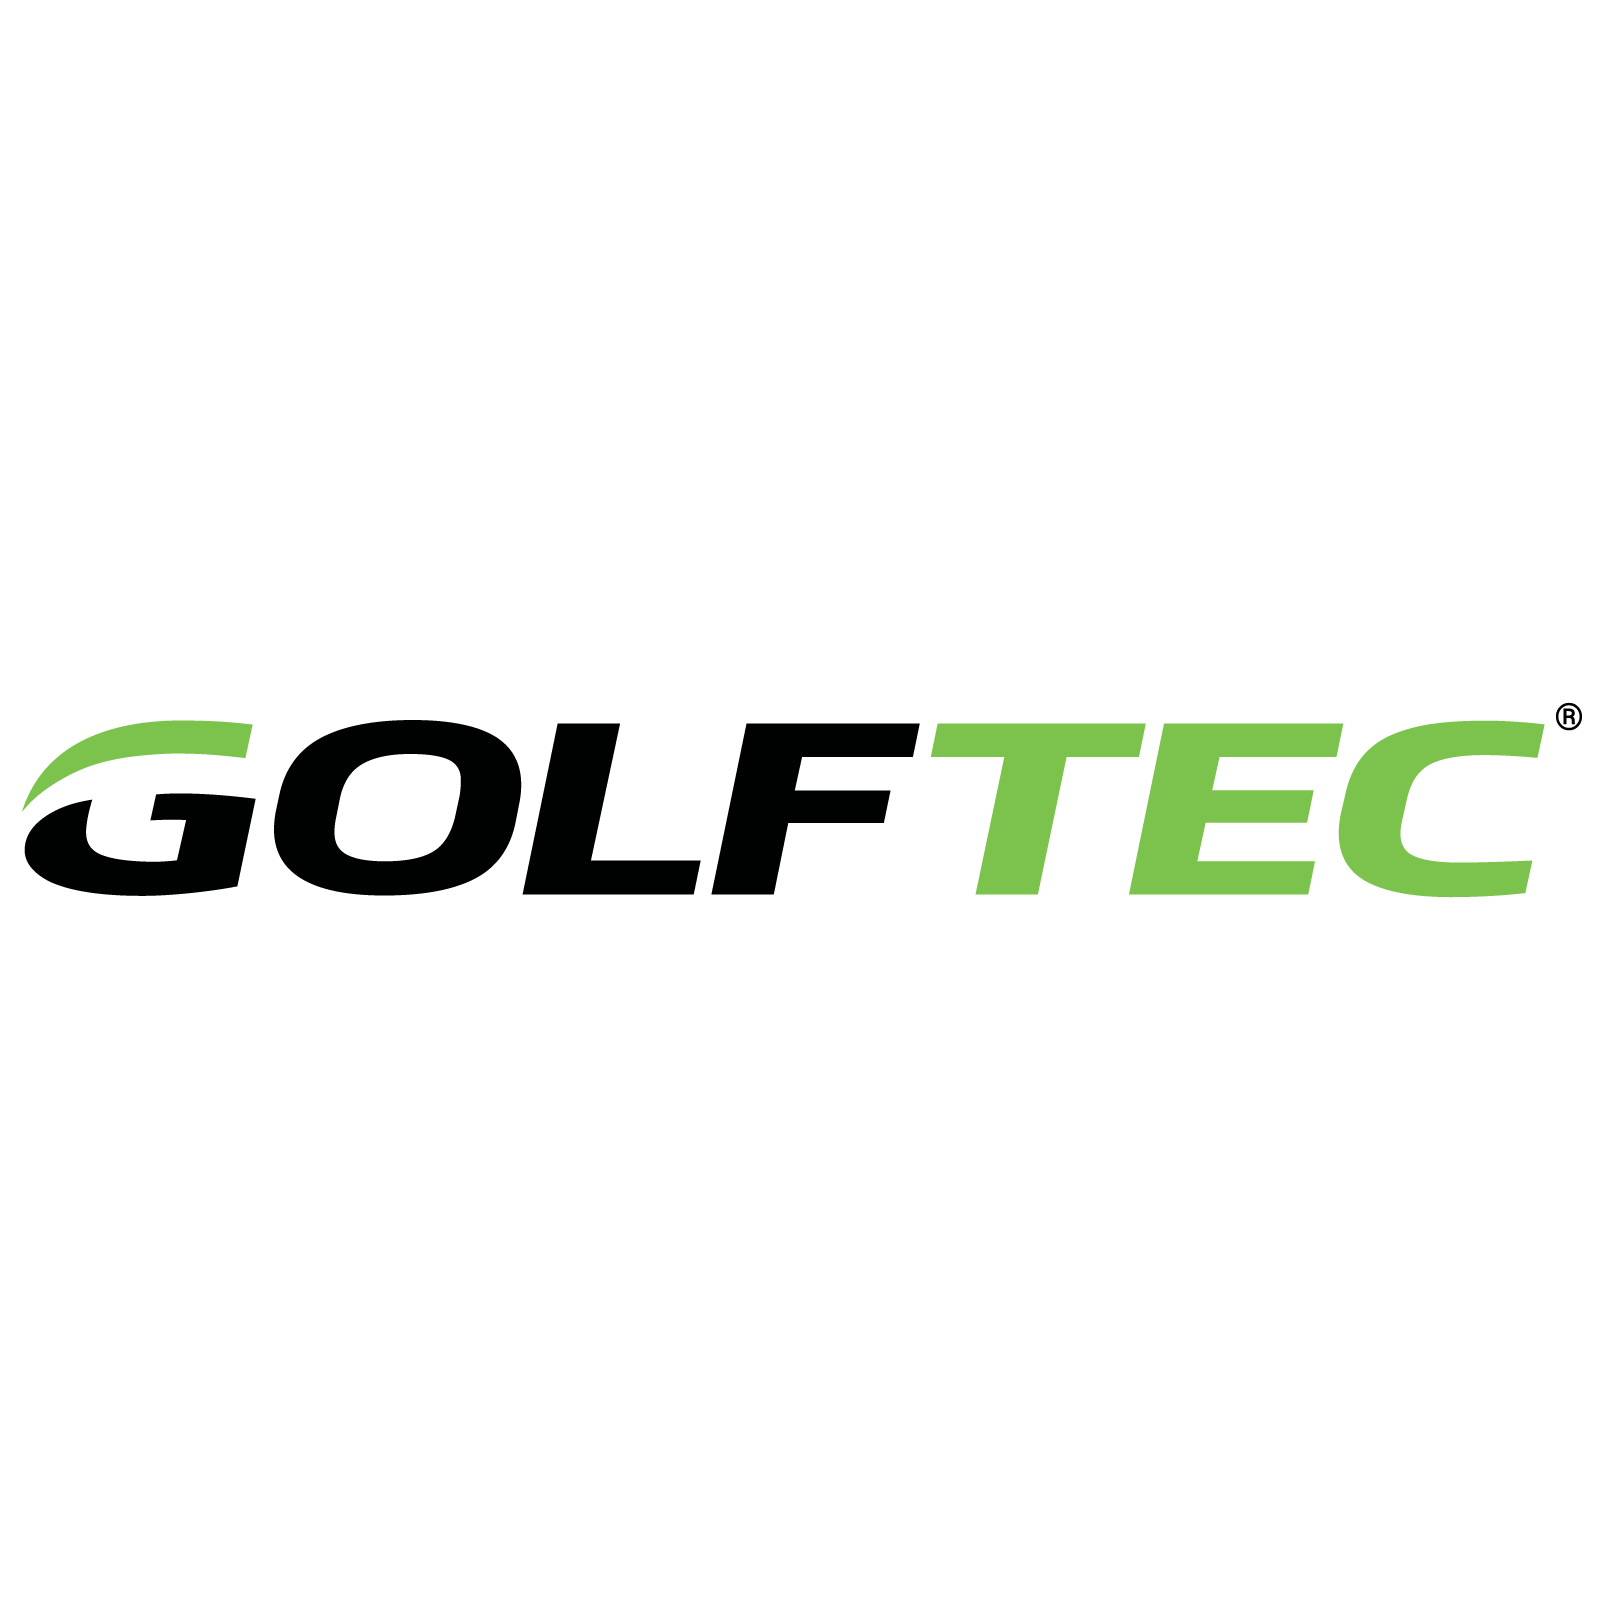 GOLFTEC North Raleigh - Raleigh, NC 27615 - (919)865-2858 | ShowMeLocal.com